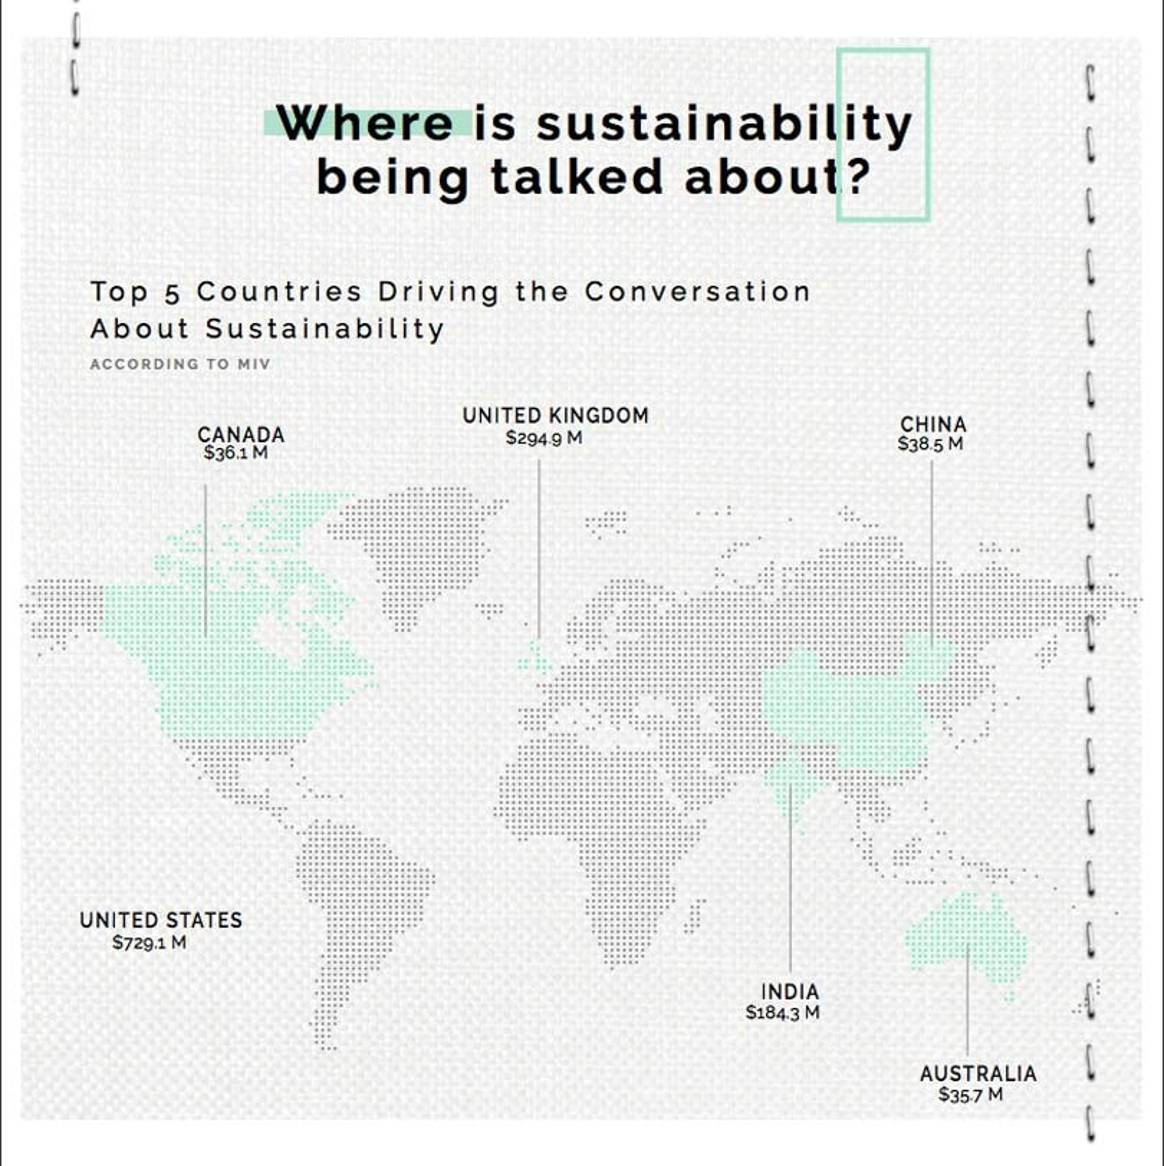 Zara and H&M leading the discussions about sustainability, says Launchmetrics study